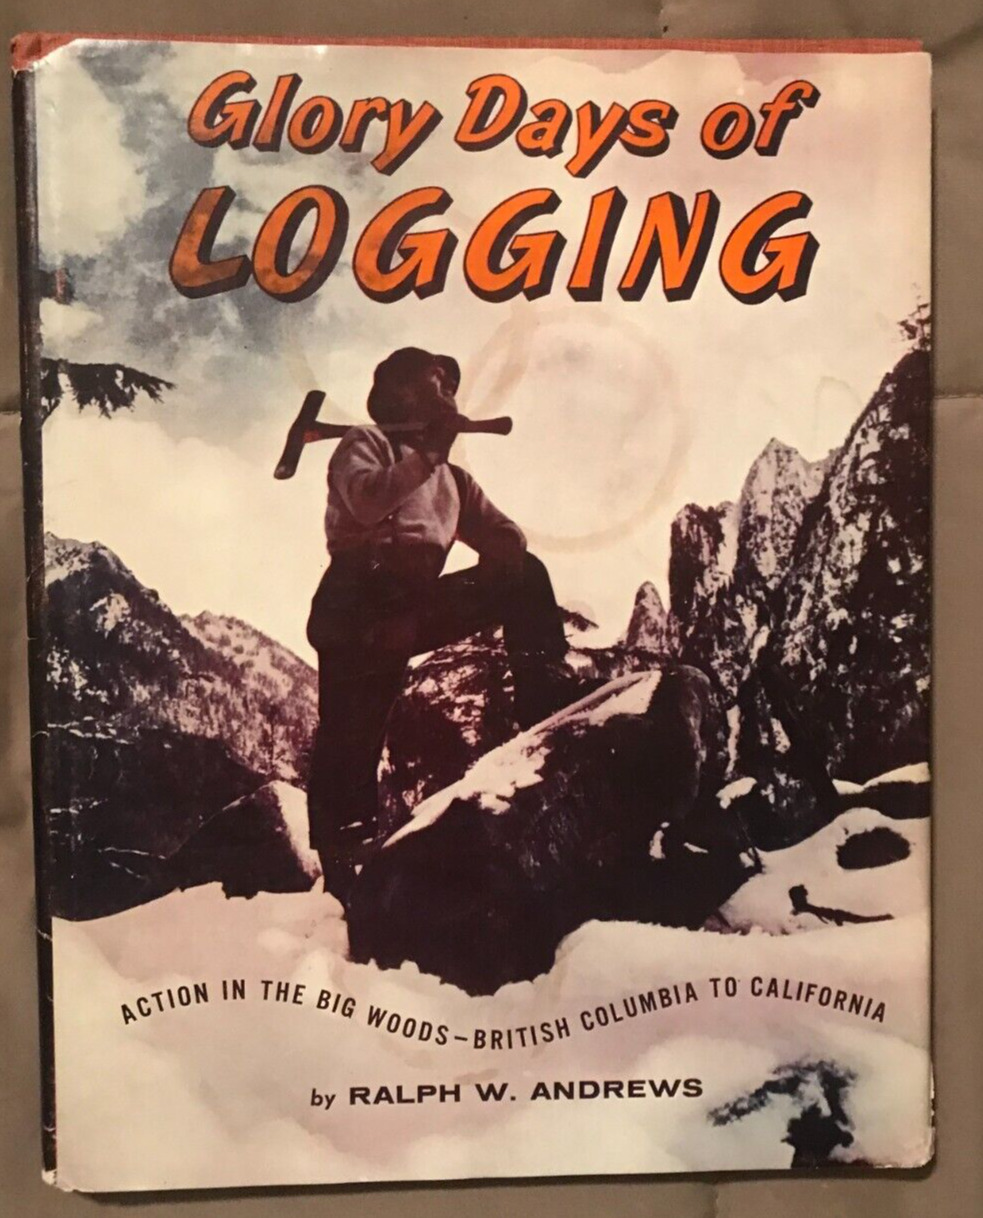 Glory Days of Logging: Action in the Big Woods - British Columbia to California